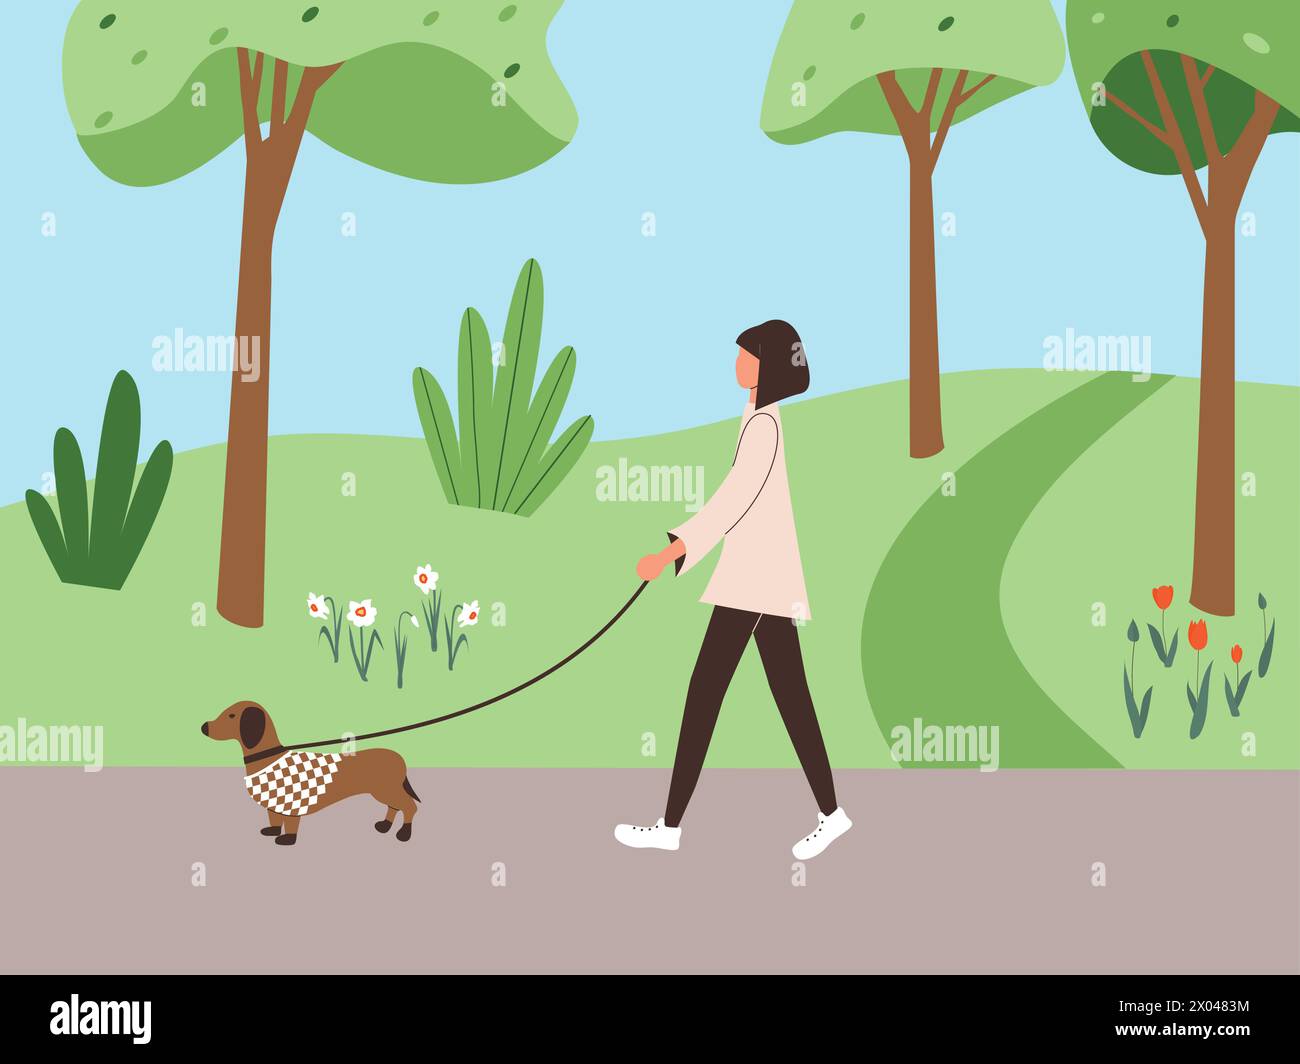 Cute girl walking with dog dachshund in overalls in spring city park or forest. Fall soothing outdoors landscape: trees, leaves, bushes and flowers Stock Vector